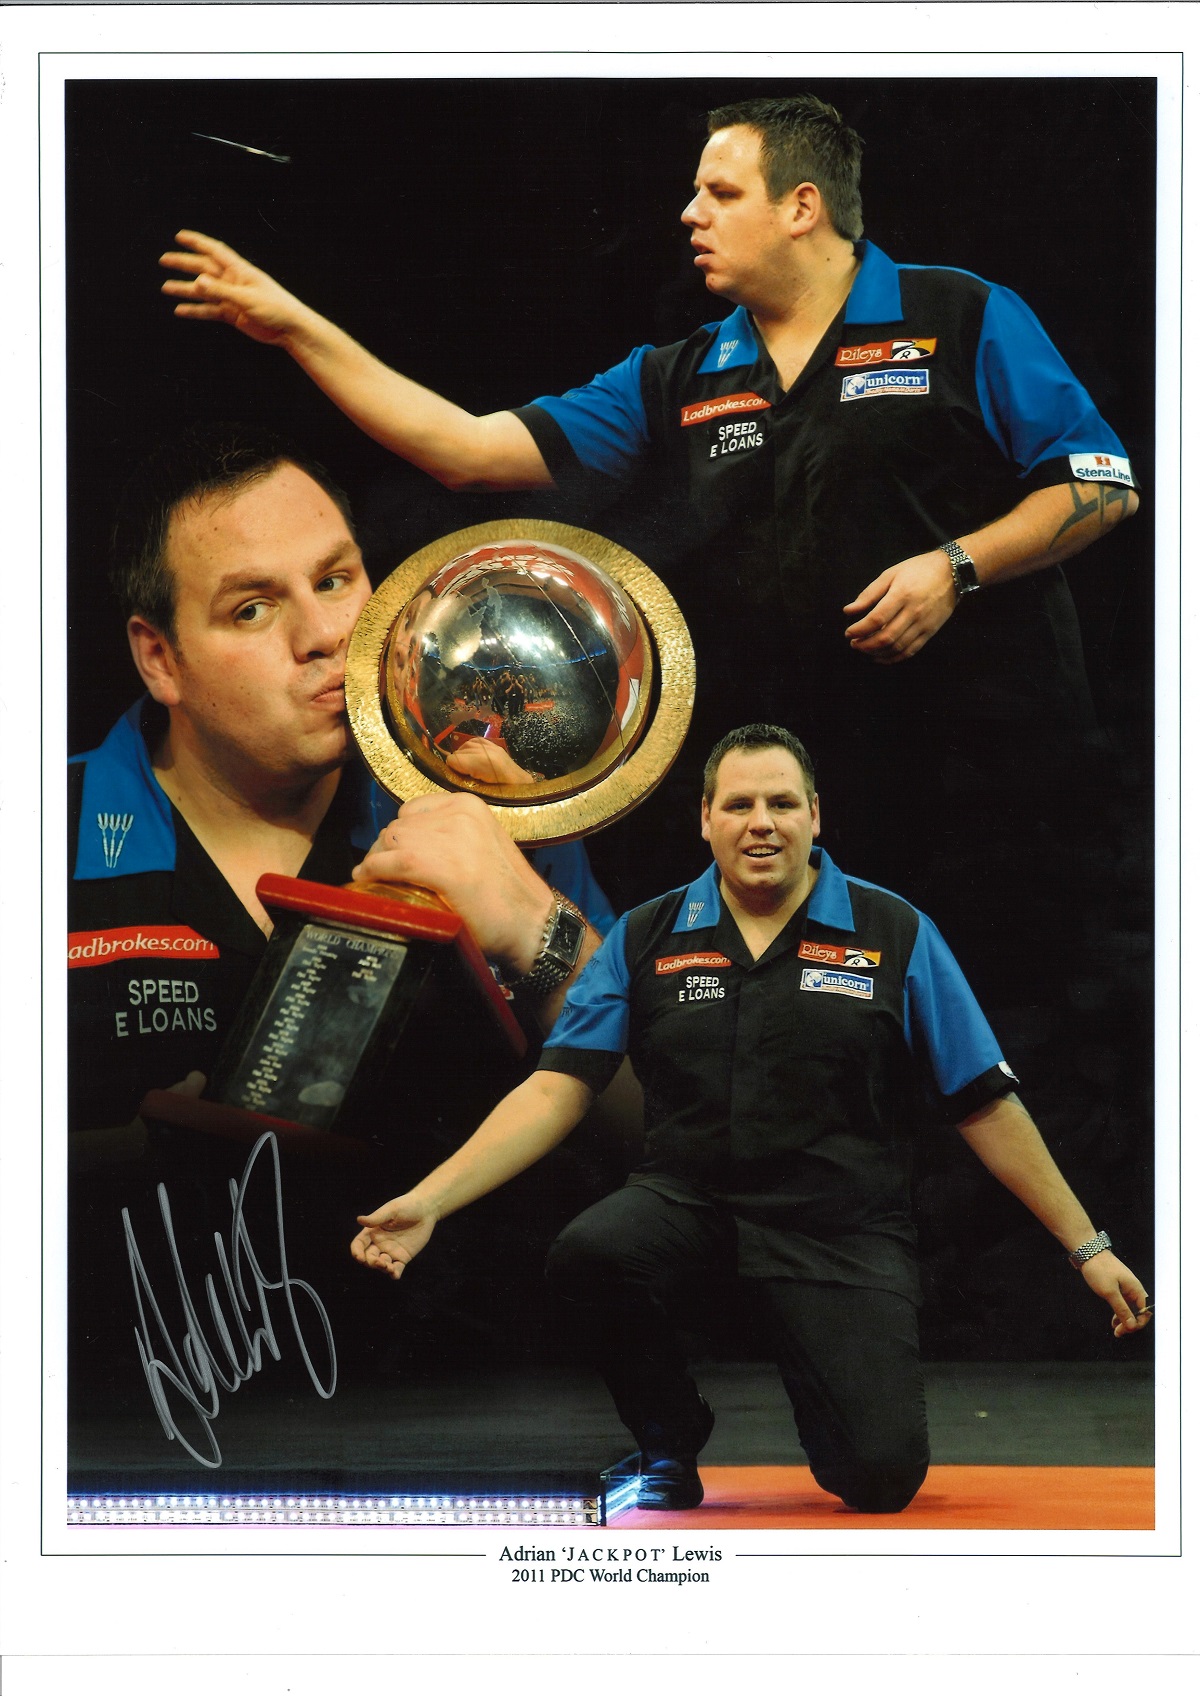 Arian Jackpot Lewis signed 16 x 12 inch darts photo. Good Condition. All autographs are genuine hand